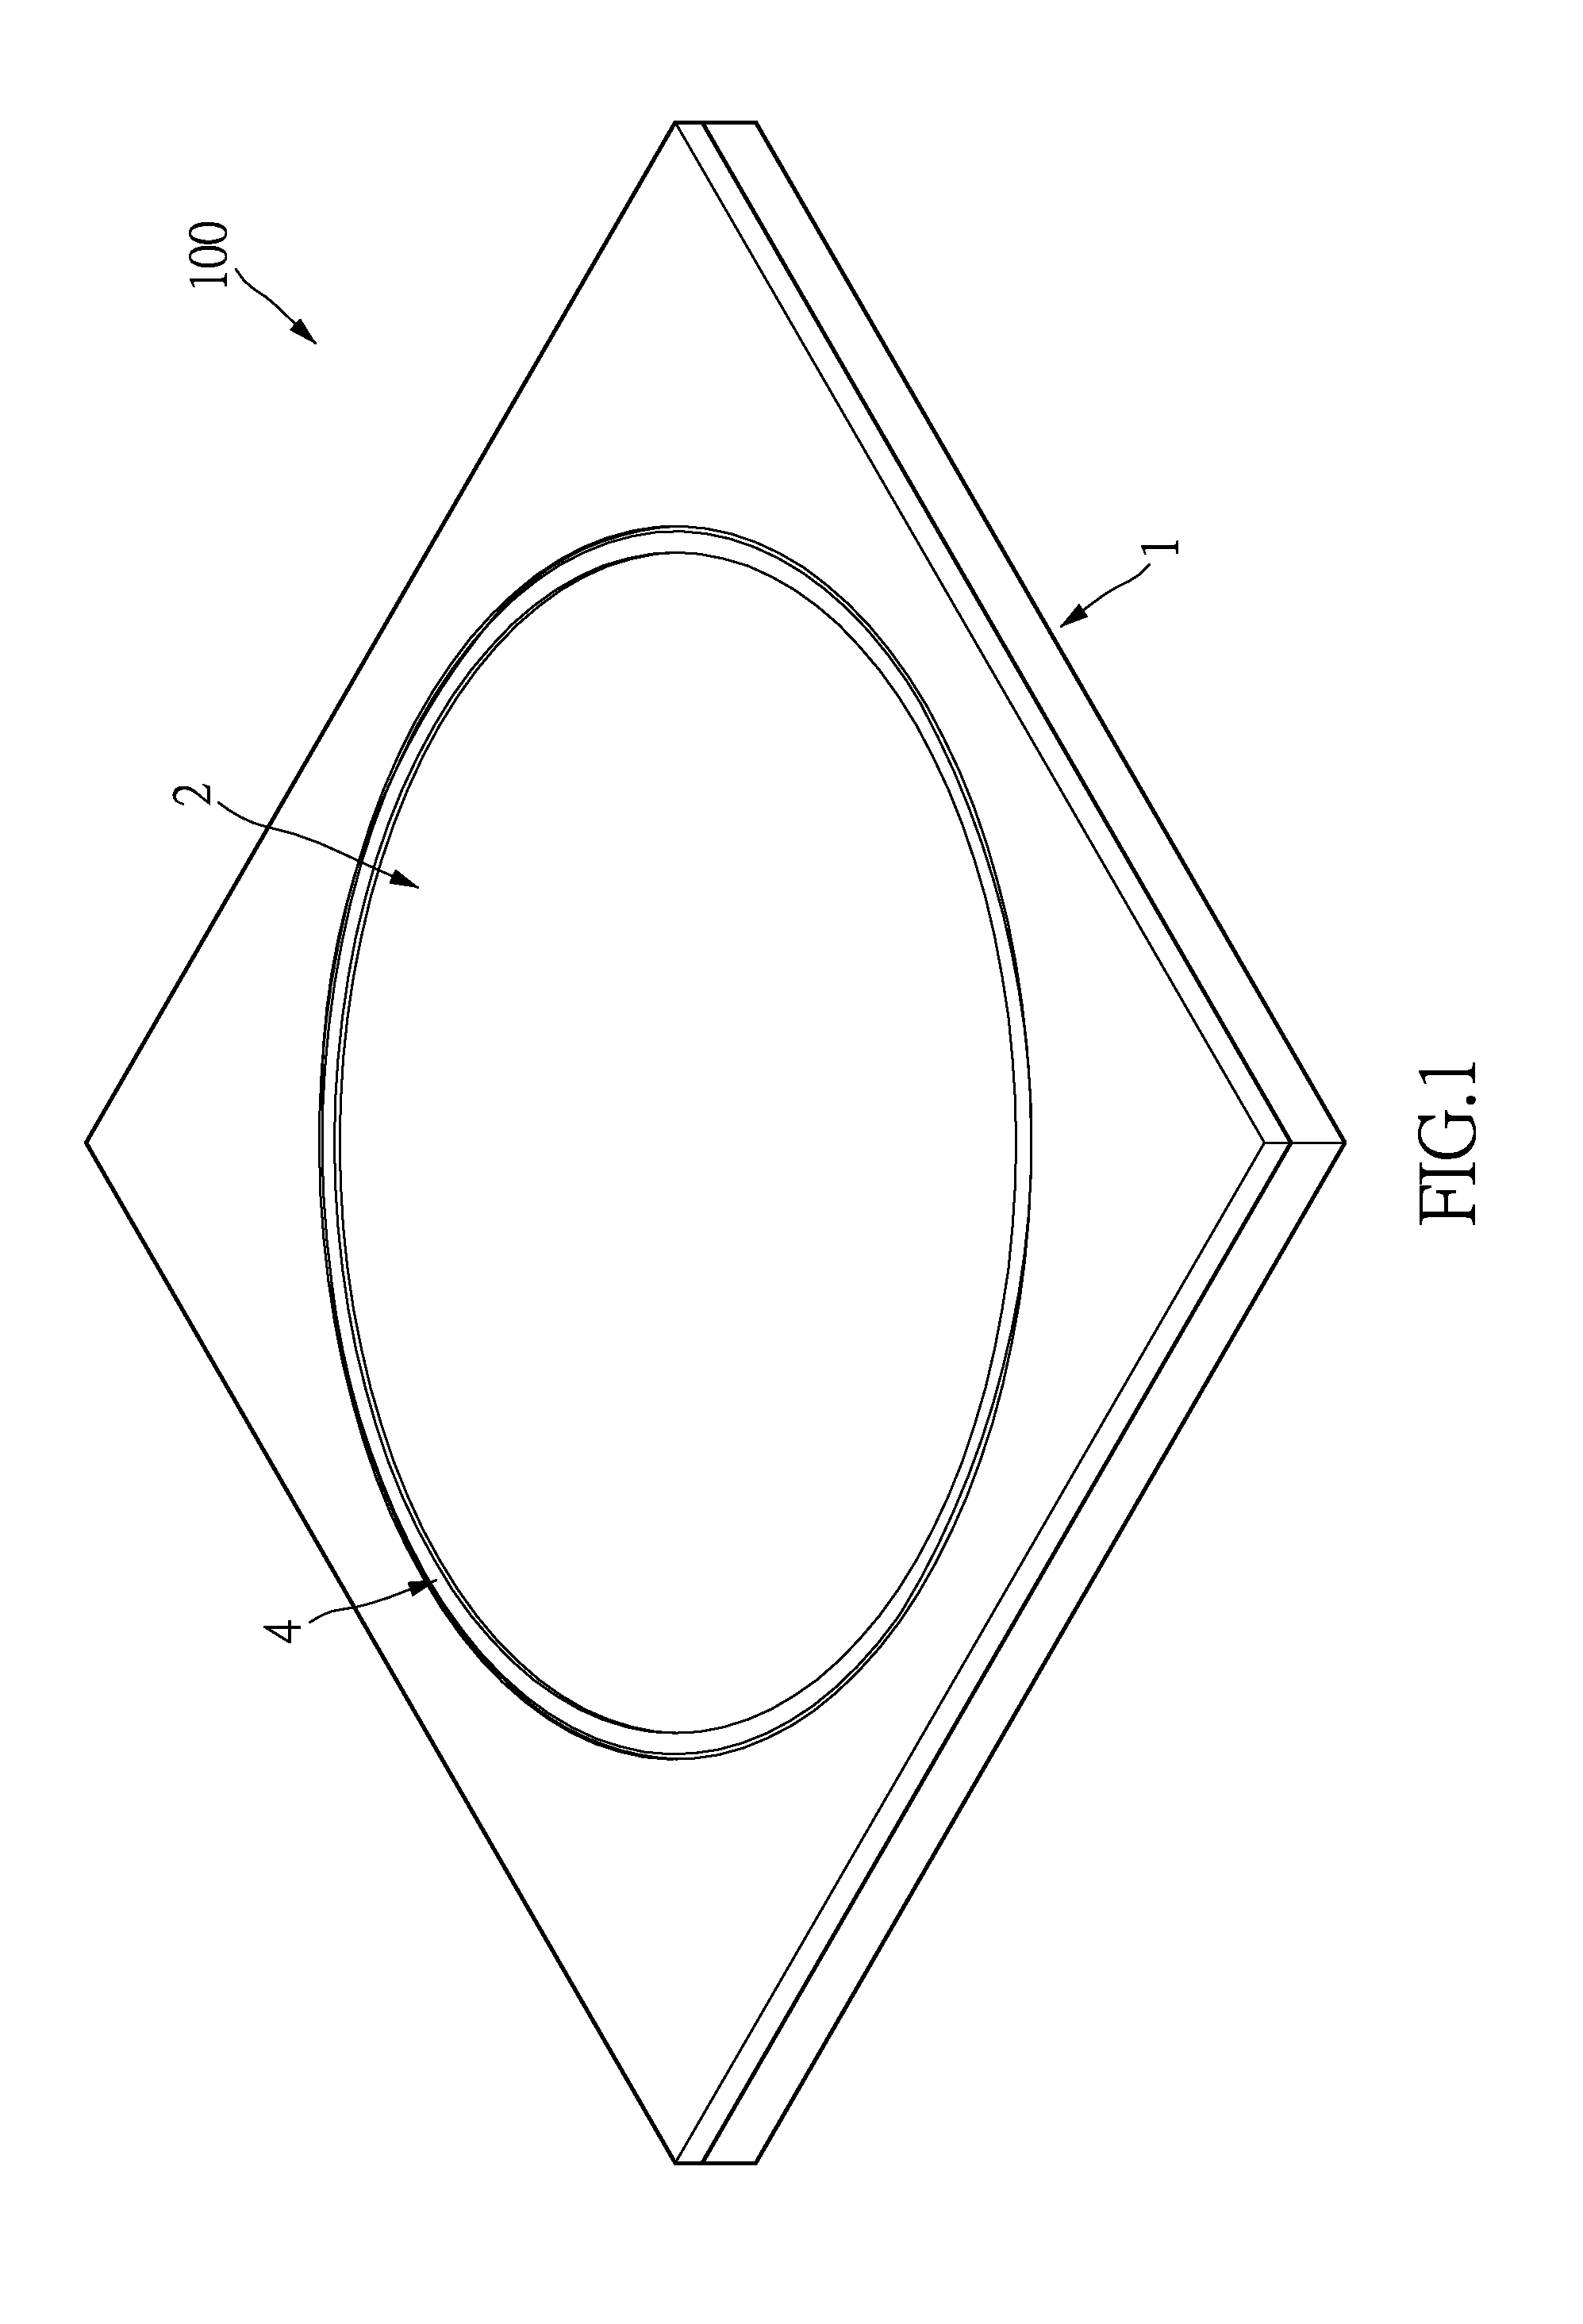 Speaker and diaphragm thereof